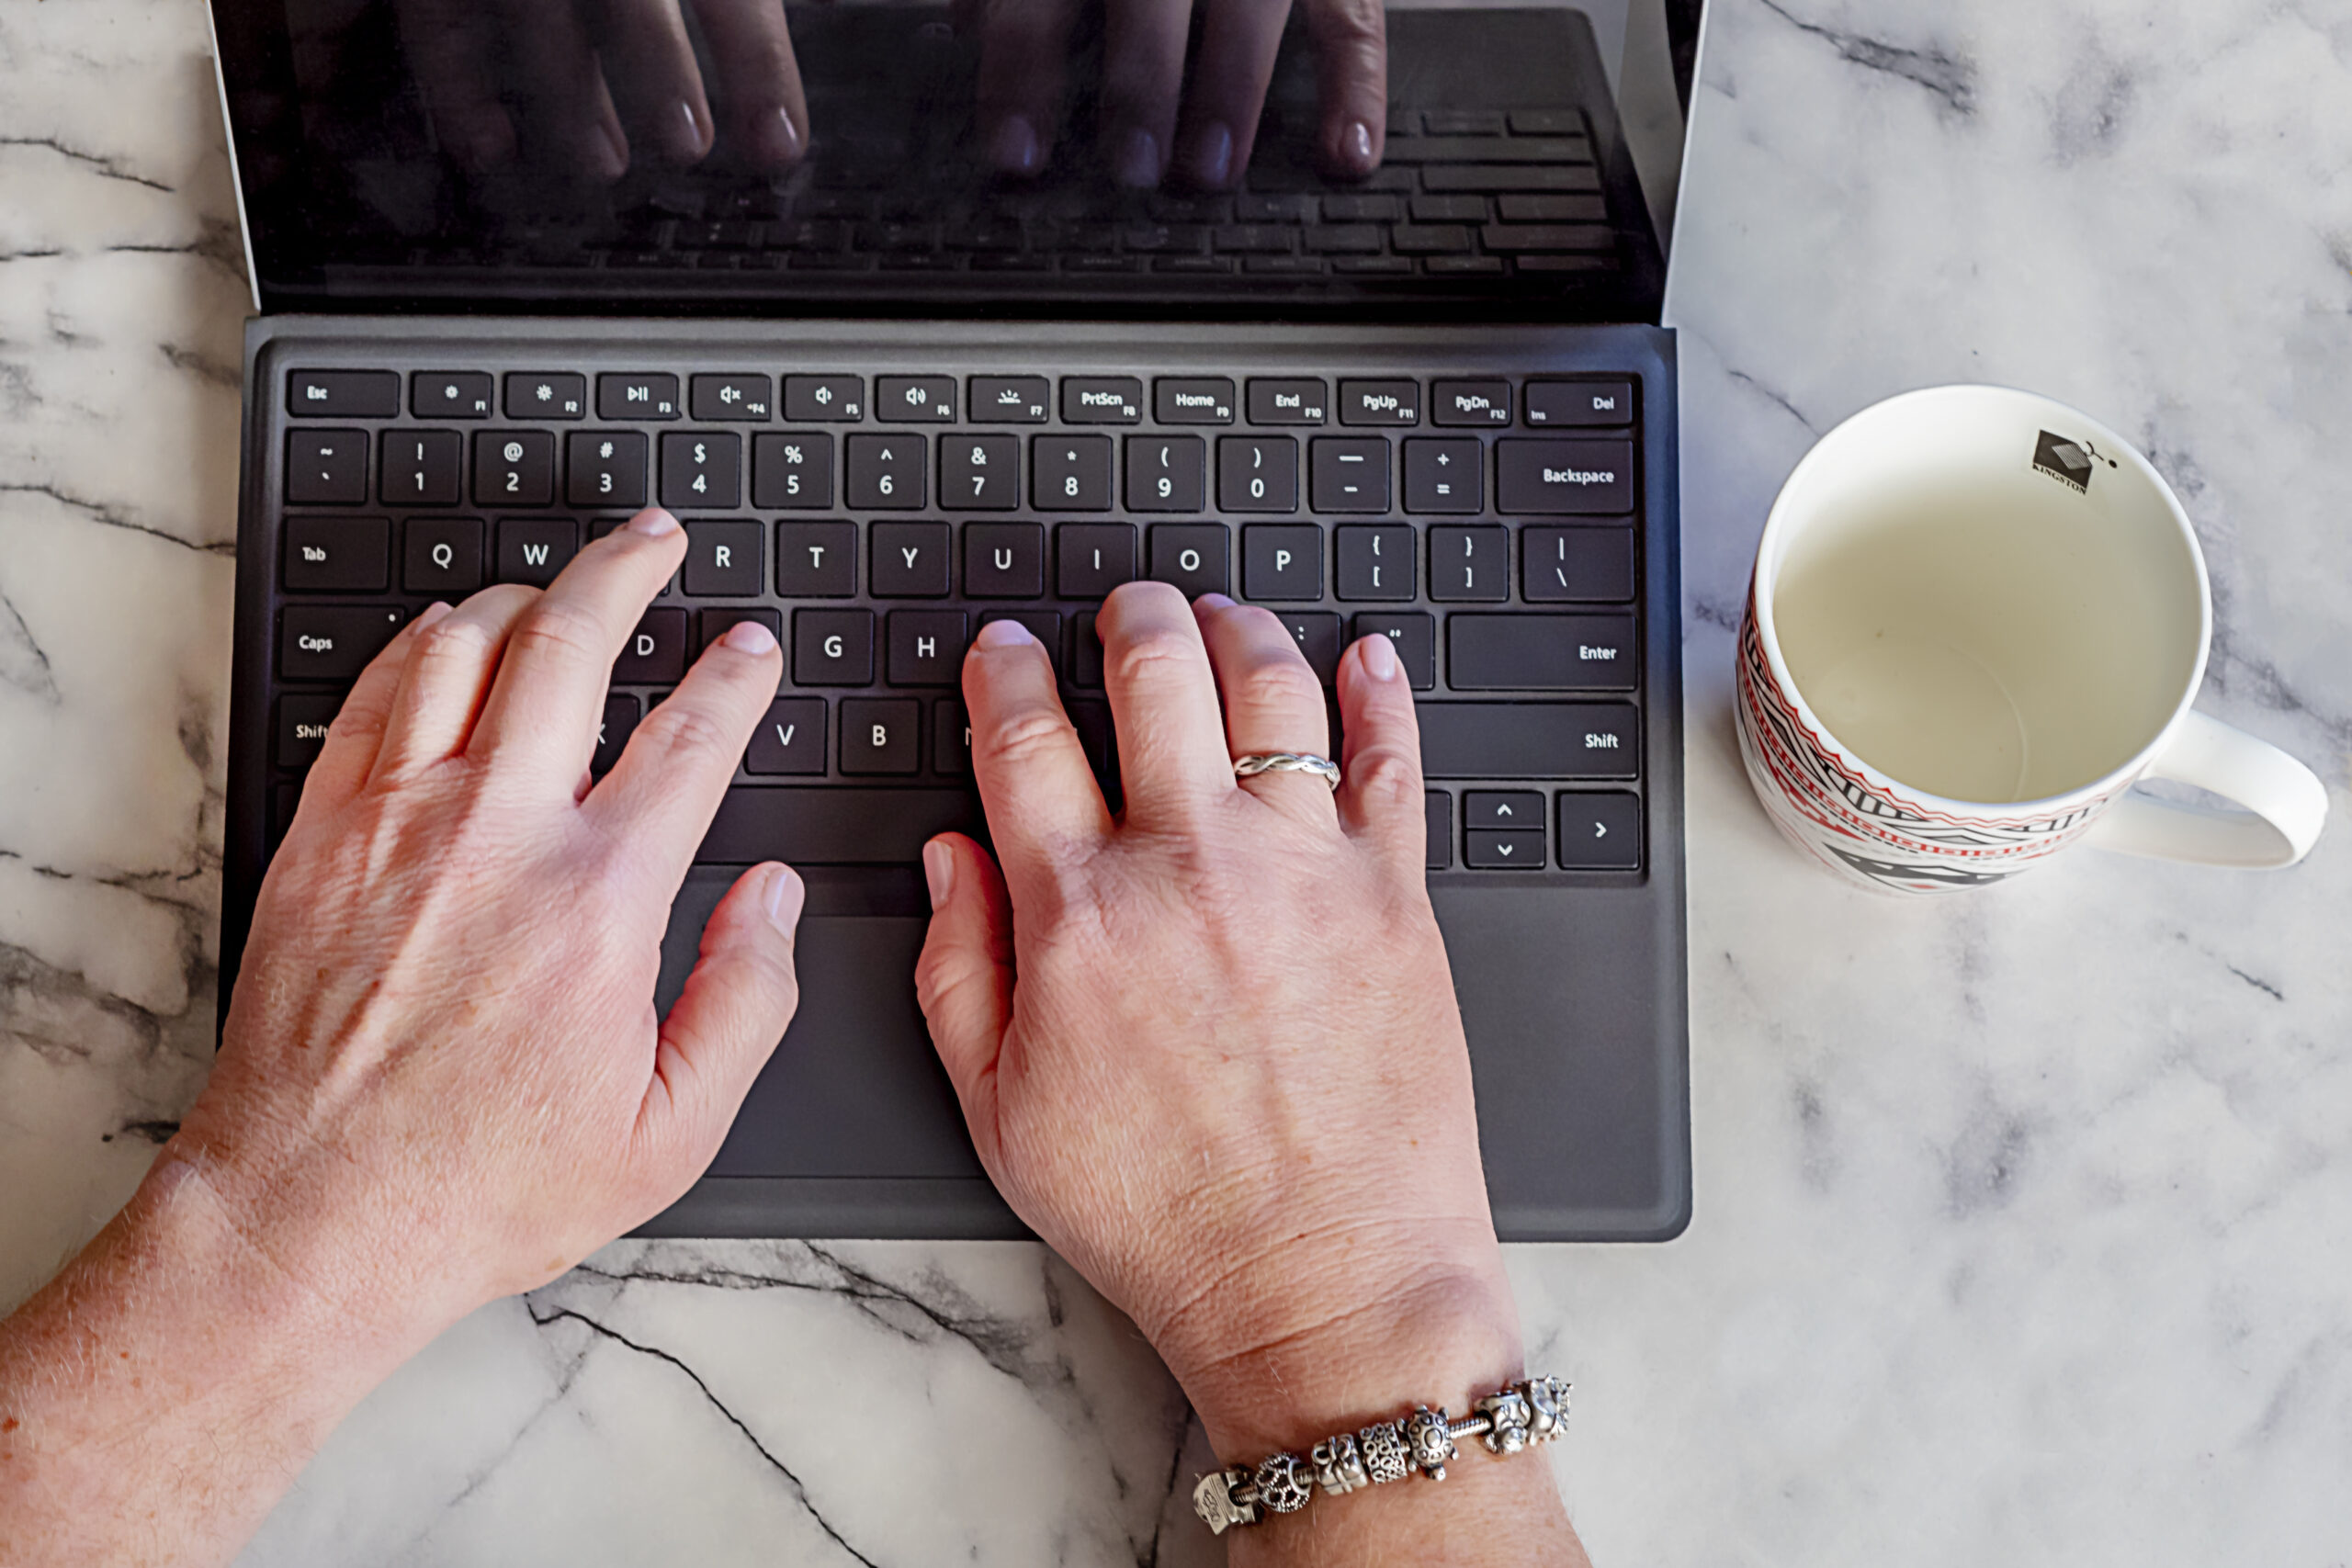 Kellie's hands typing on a laptop keyboard represent her project managing the publication of a client's book. 